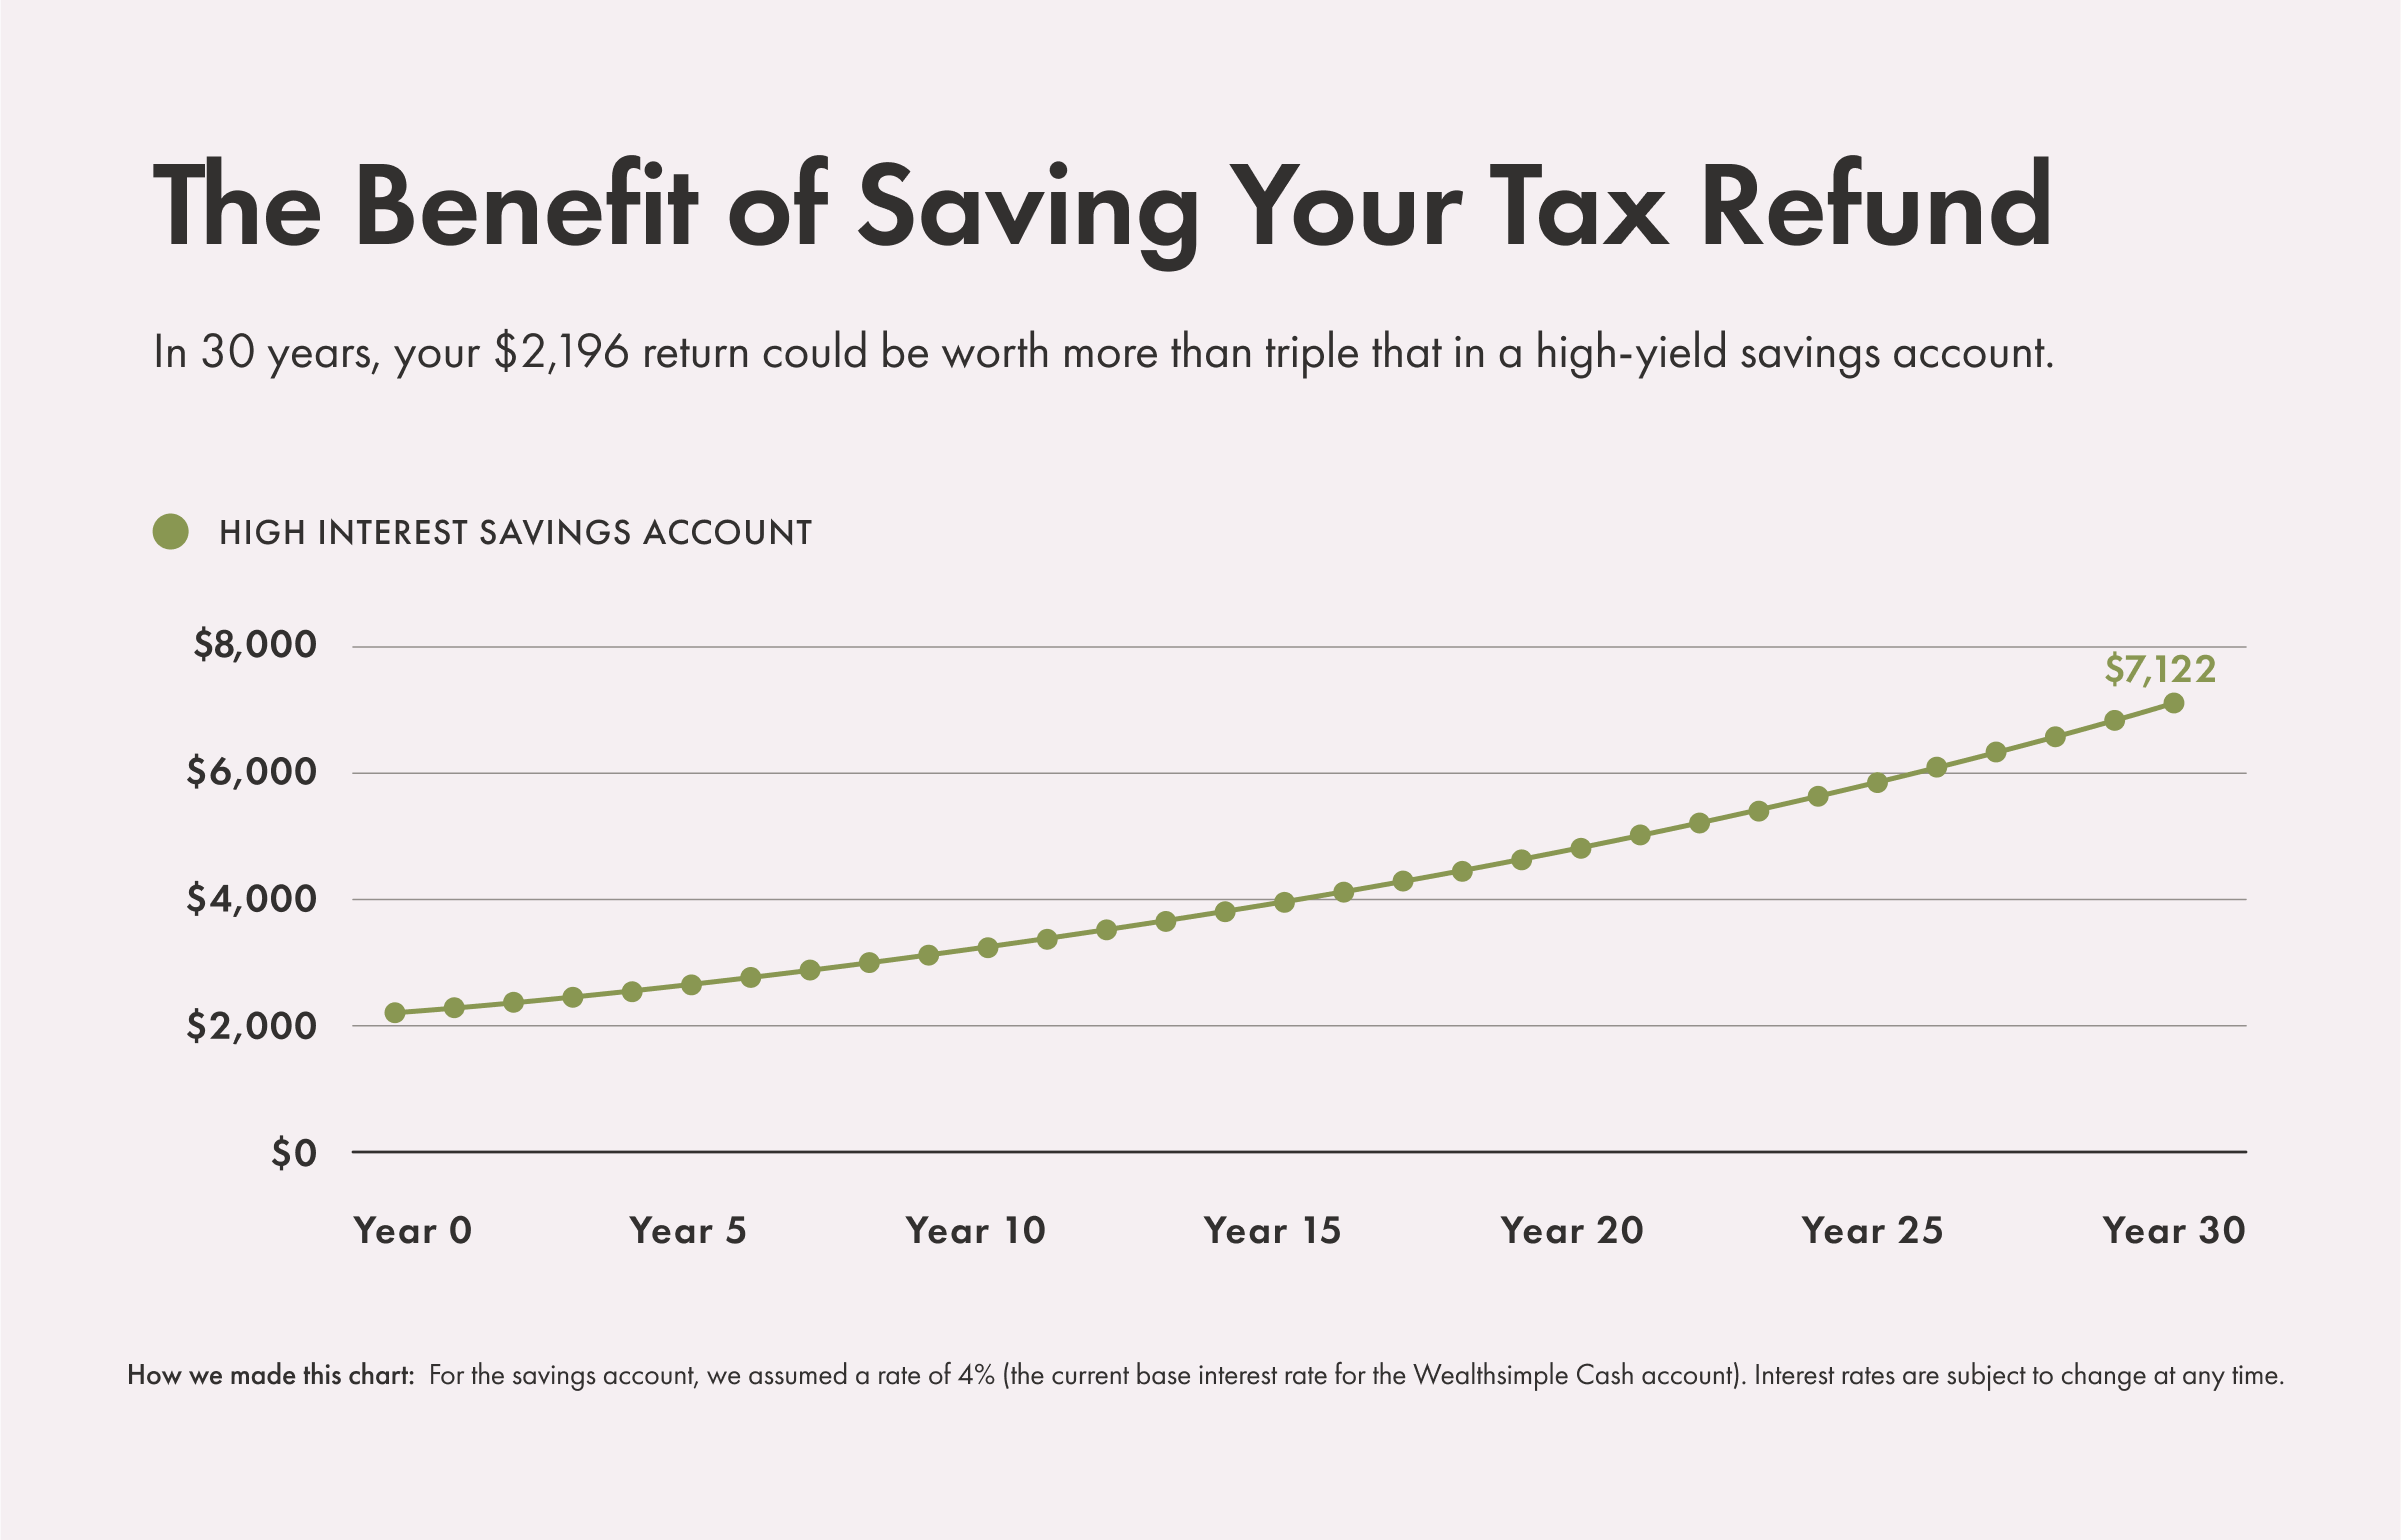 Instead of putting your tax refund in a chequing account with 0% interest, you can put it in a high-interest savings account — and watch it grow.